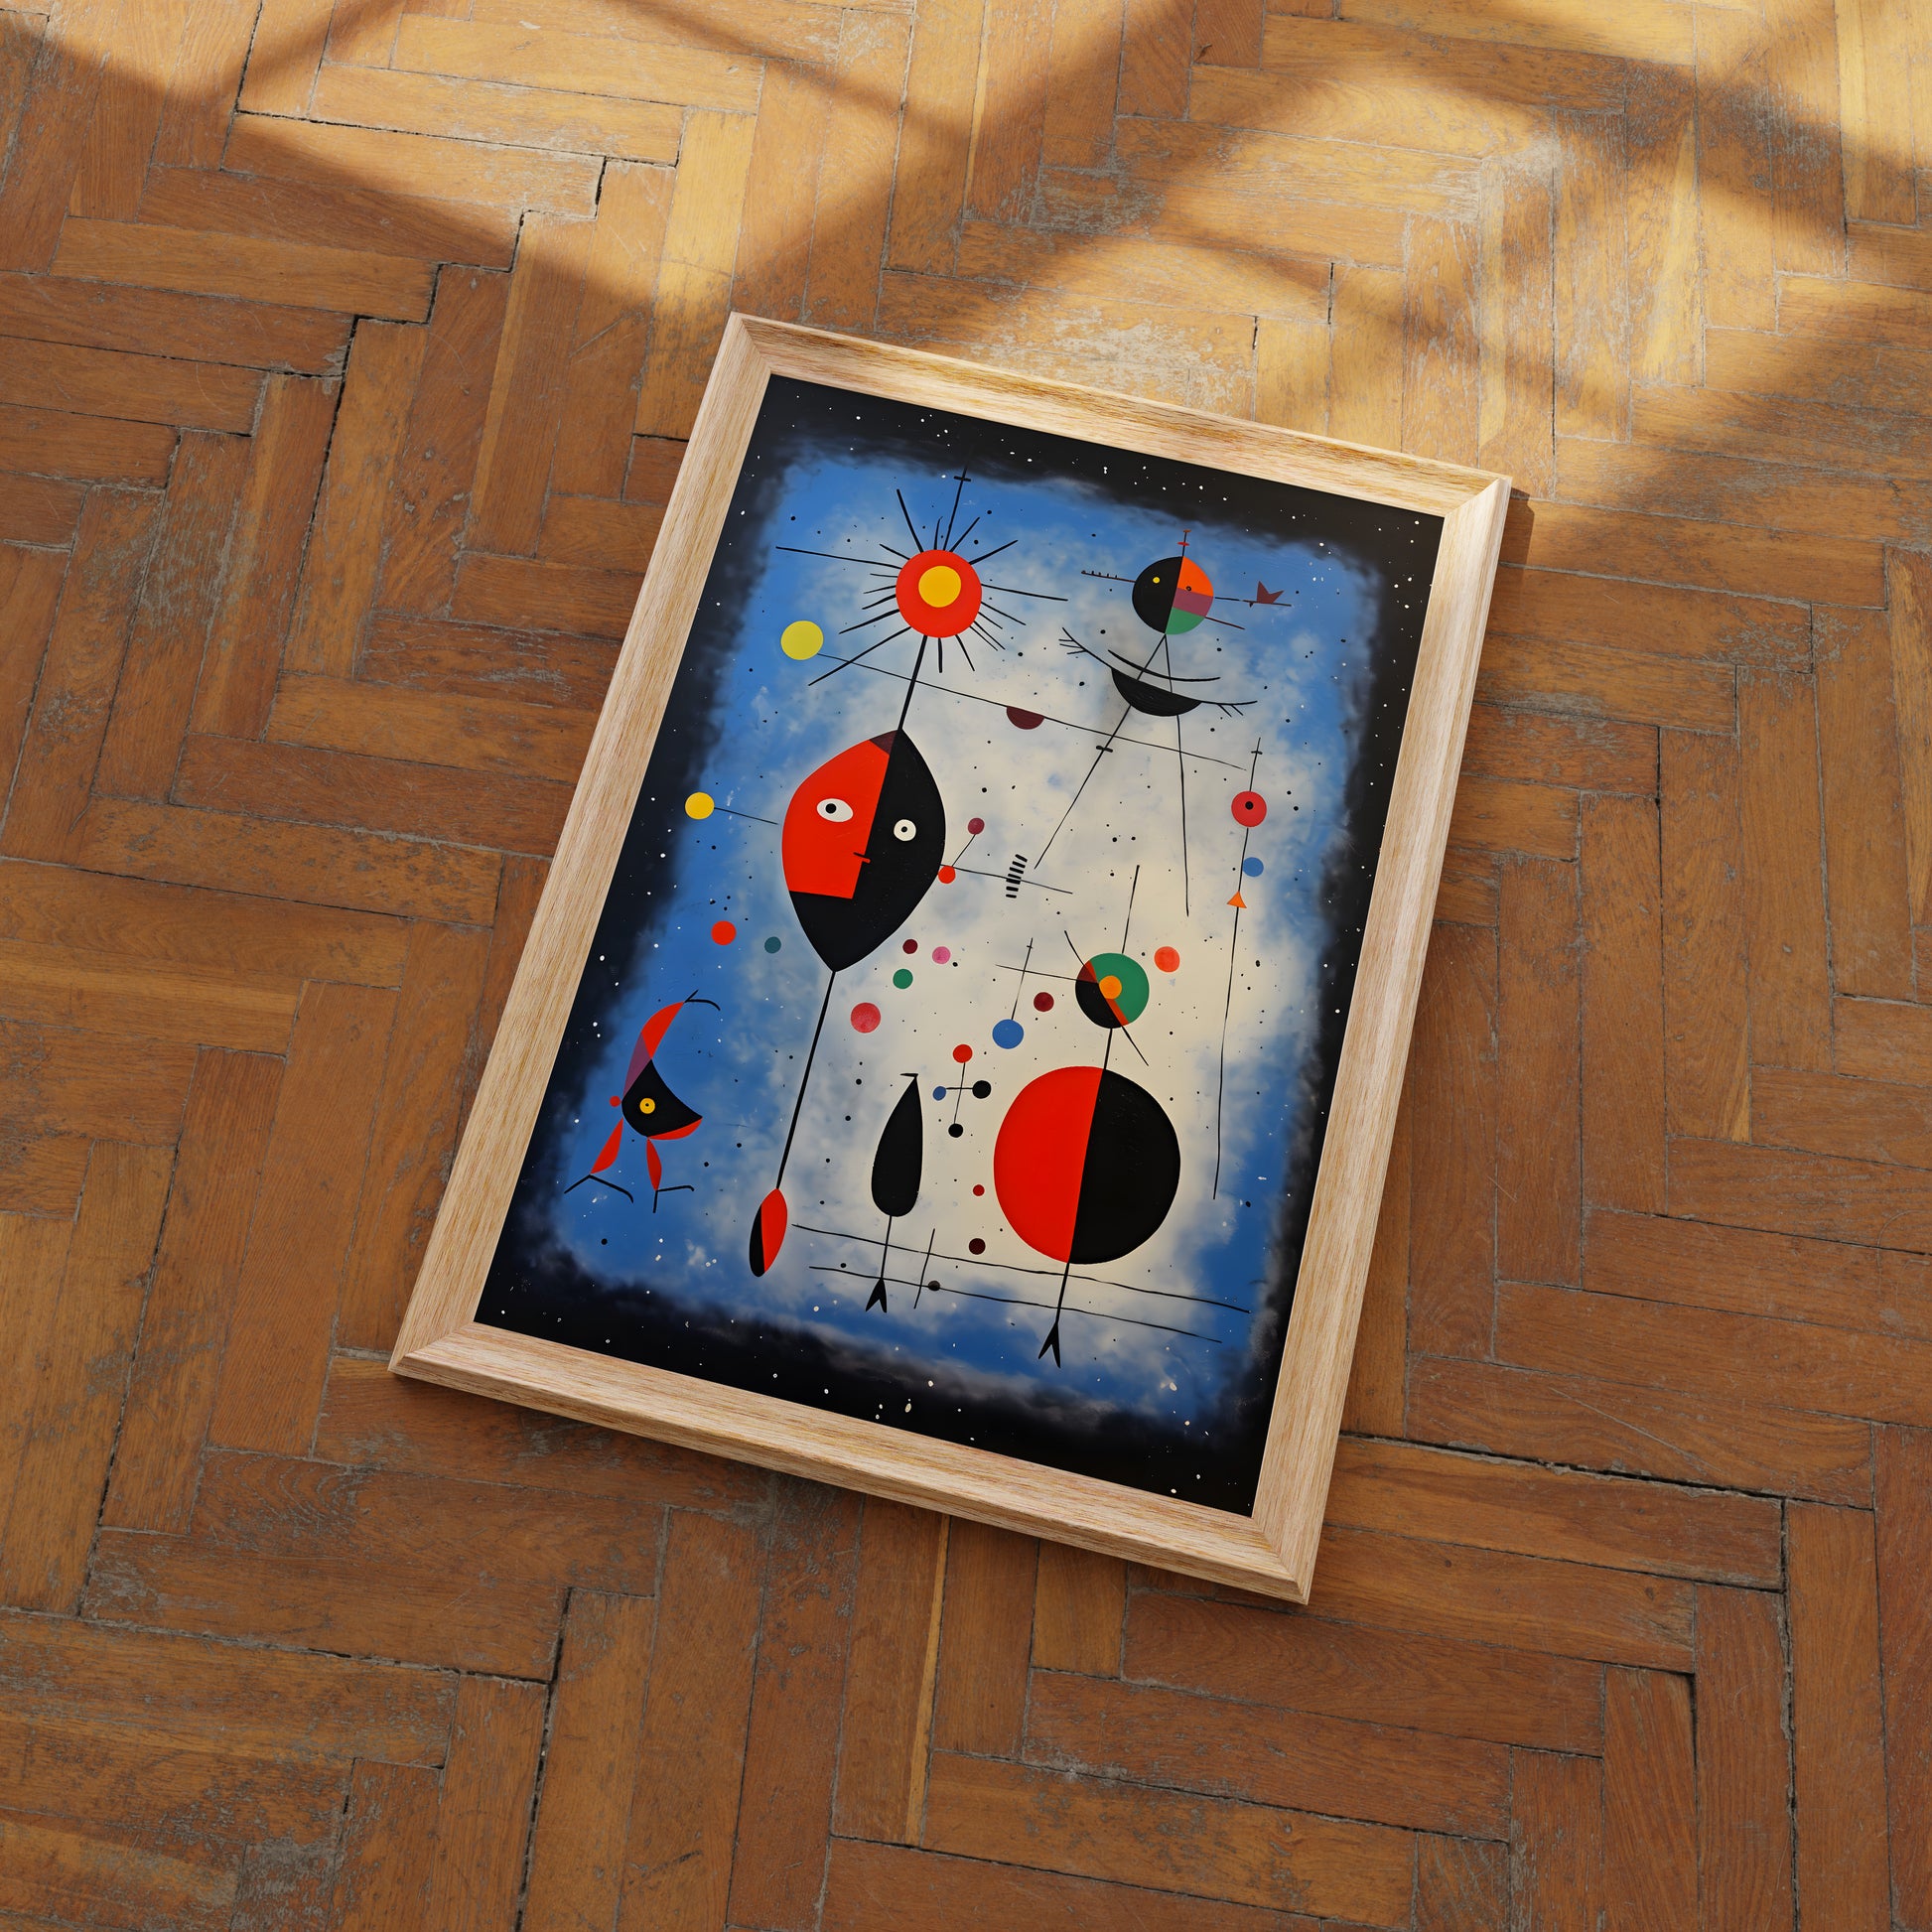 "Abstract painting with colorful shapes and dots on a wooden floor."